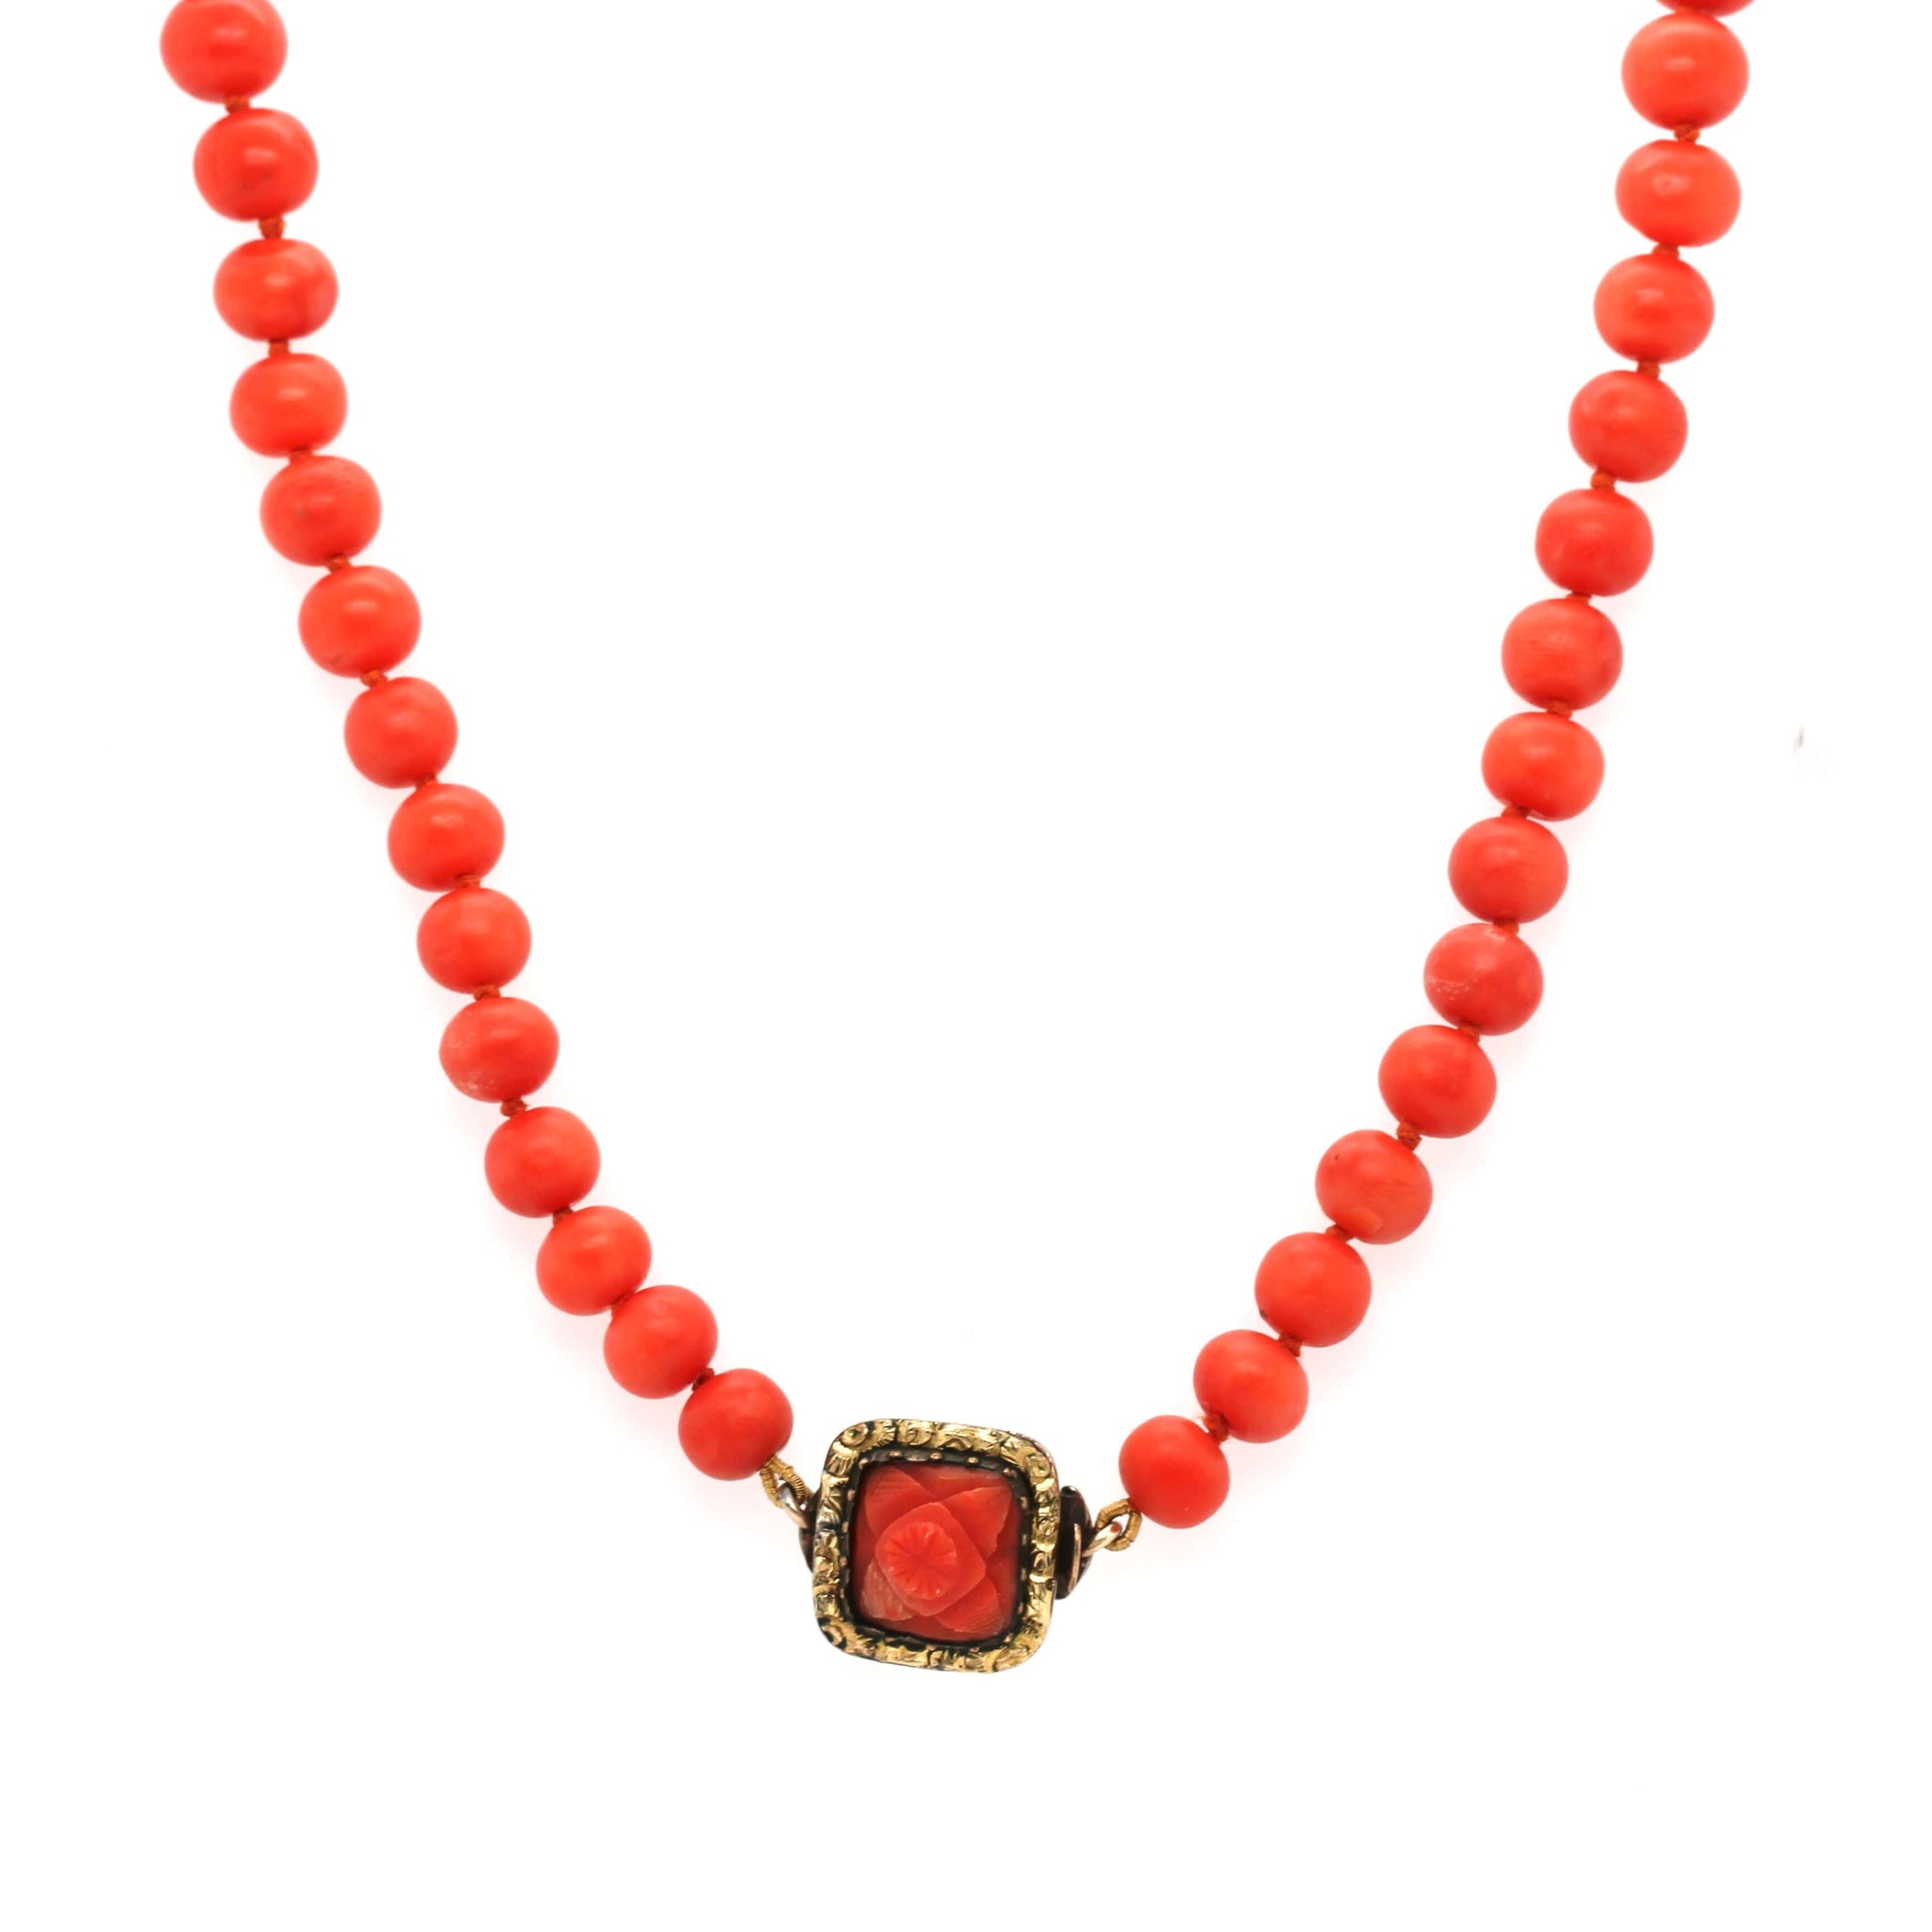 Late Georgian Coral Necklace